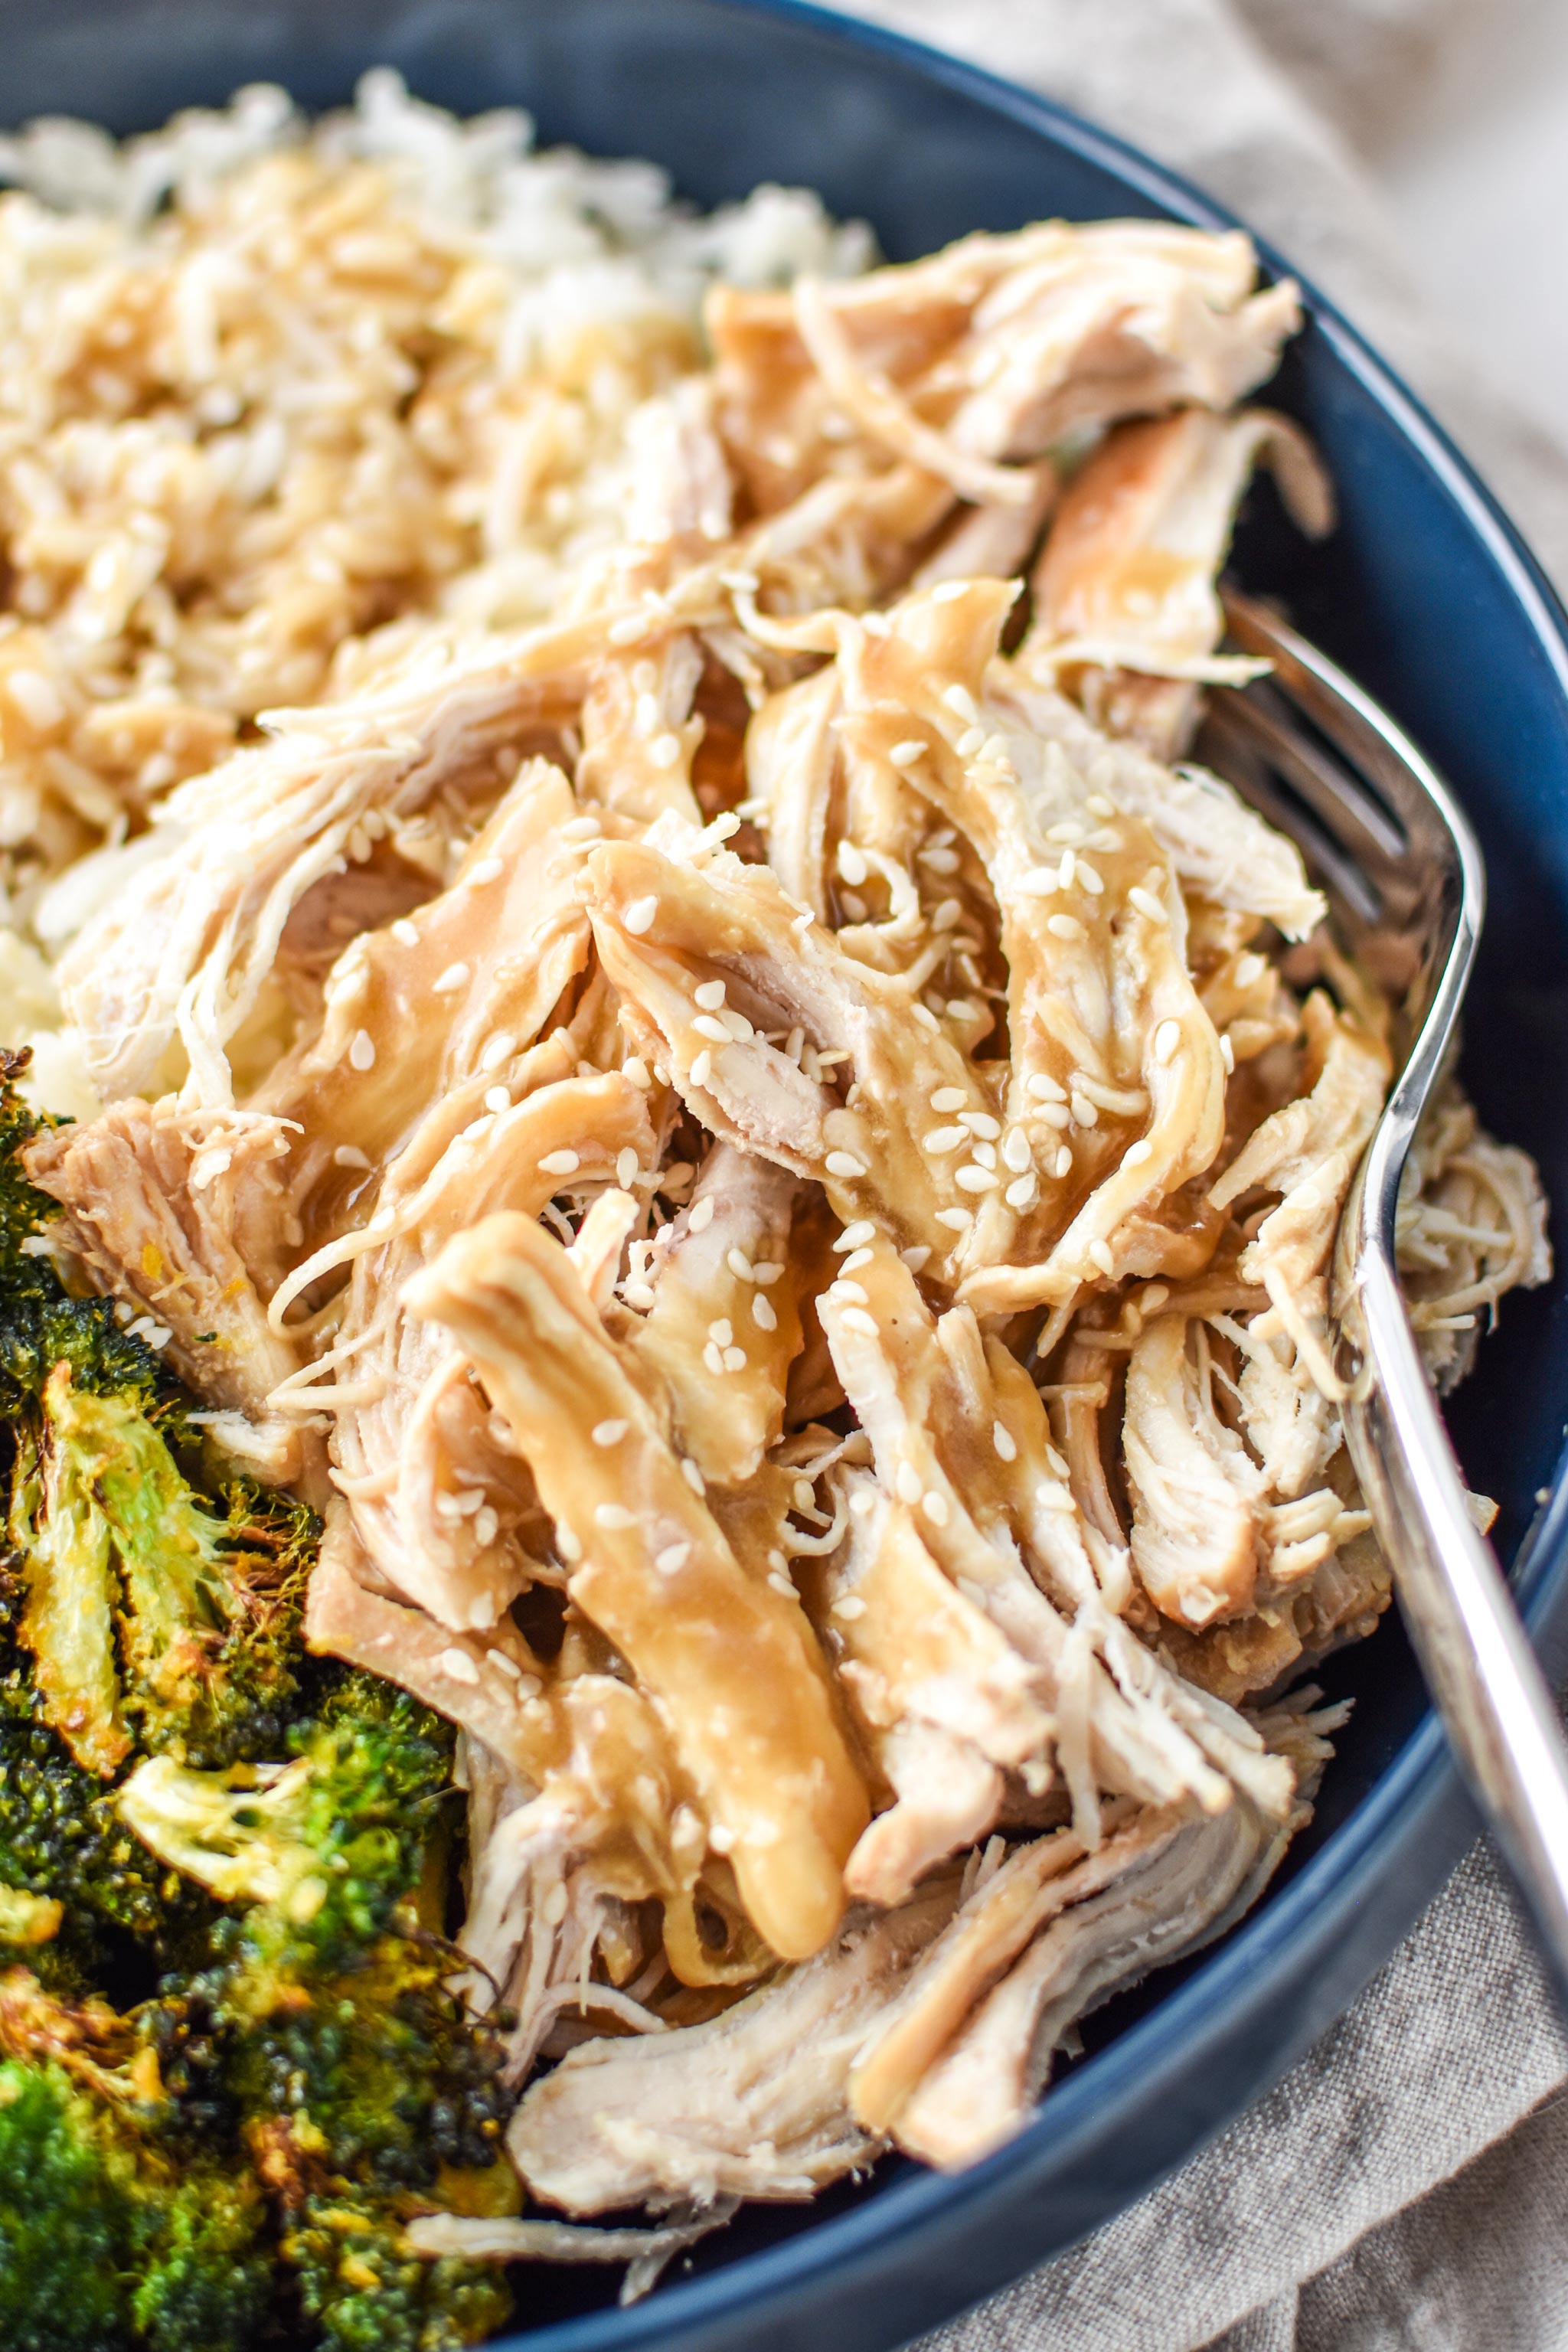 Sesame shredded chicken served with sauce, rice and broccoli